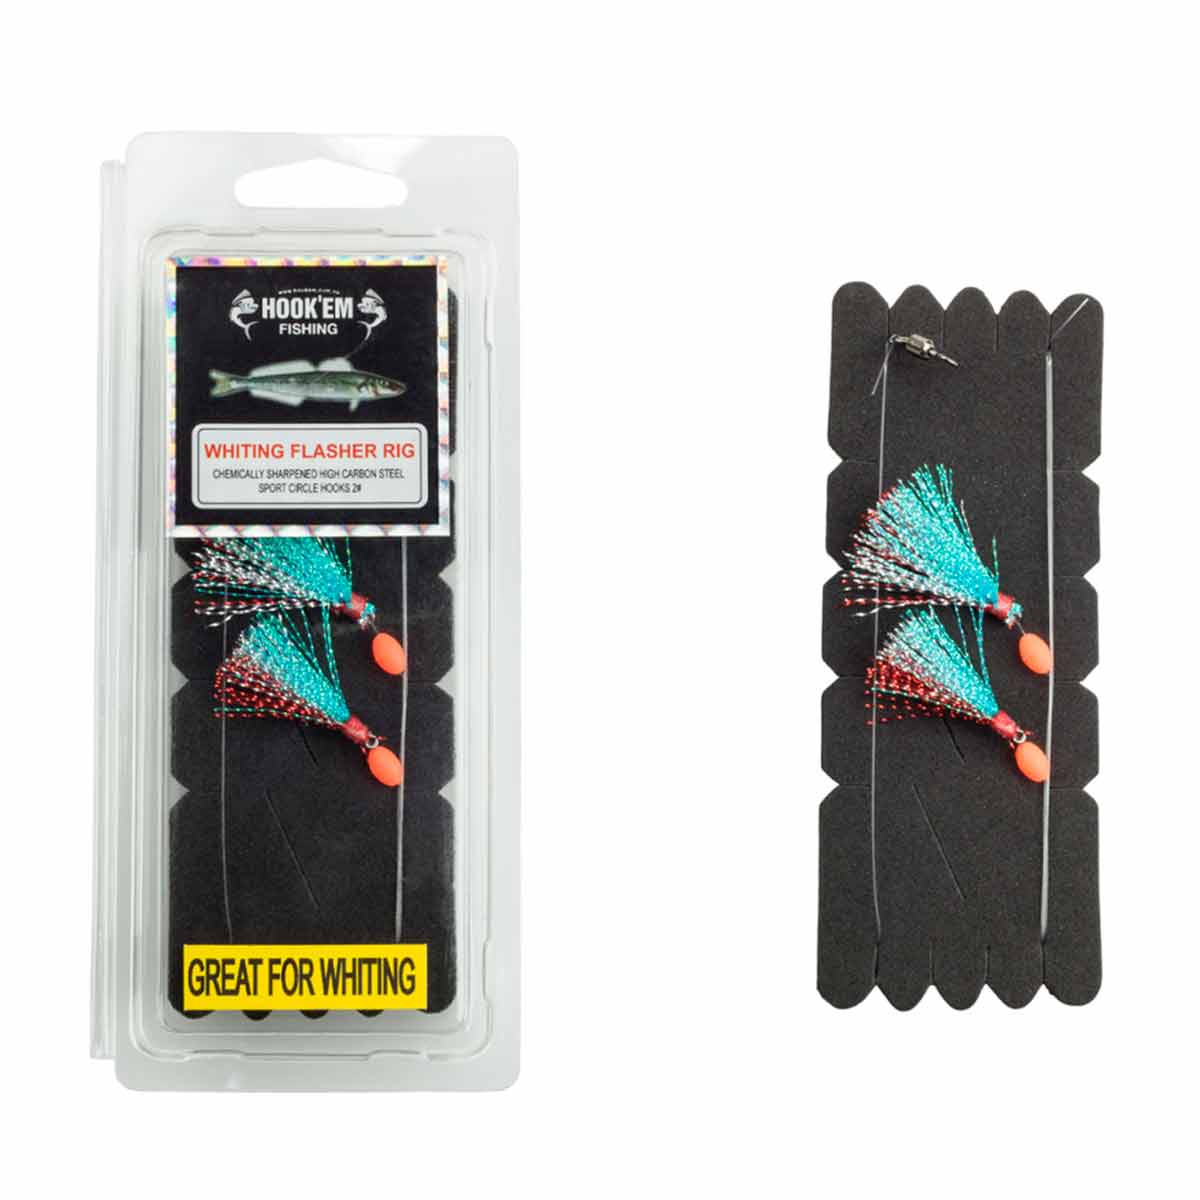 Whiting Bait Hook Fishing Hooks for sale, Shop with Afterpay